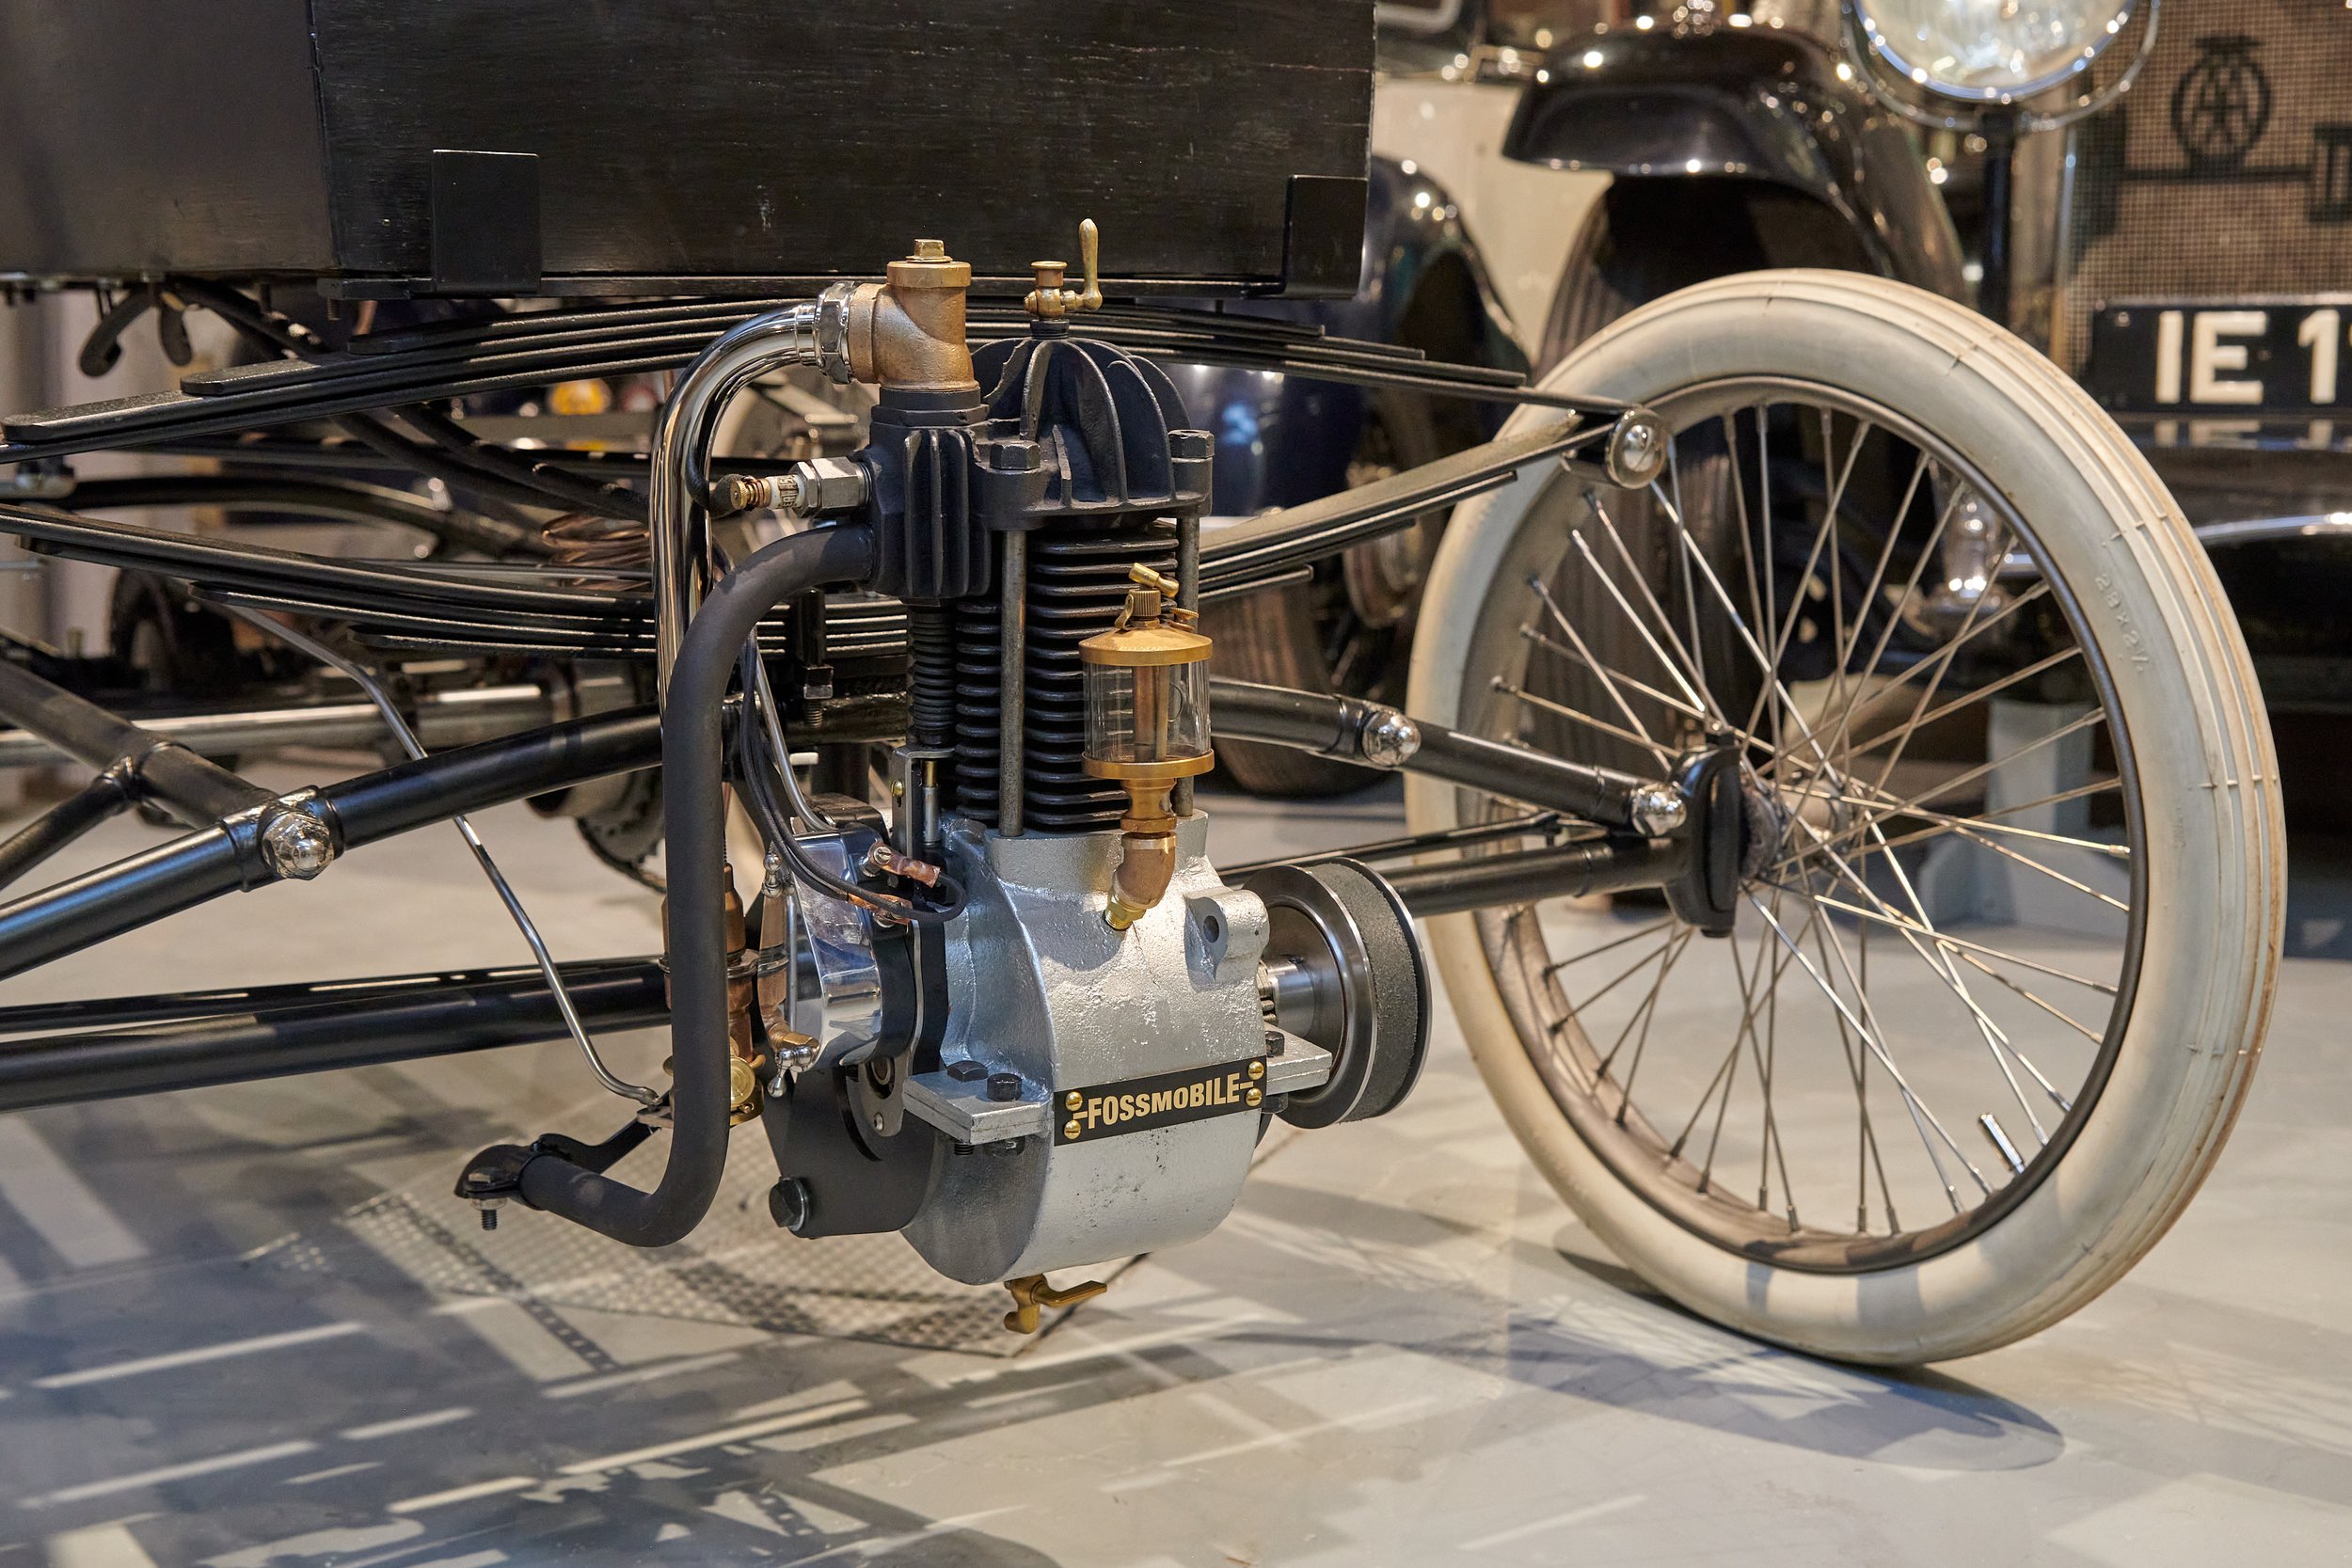  The replica’s single-cylinder engine, which originated as a period copy of a De Dion design. 